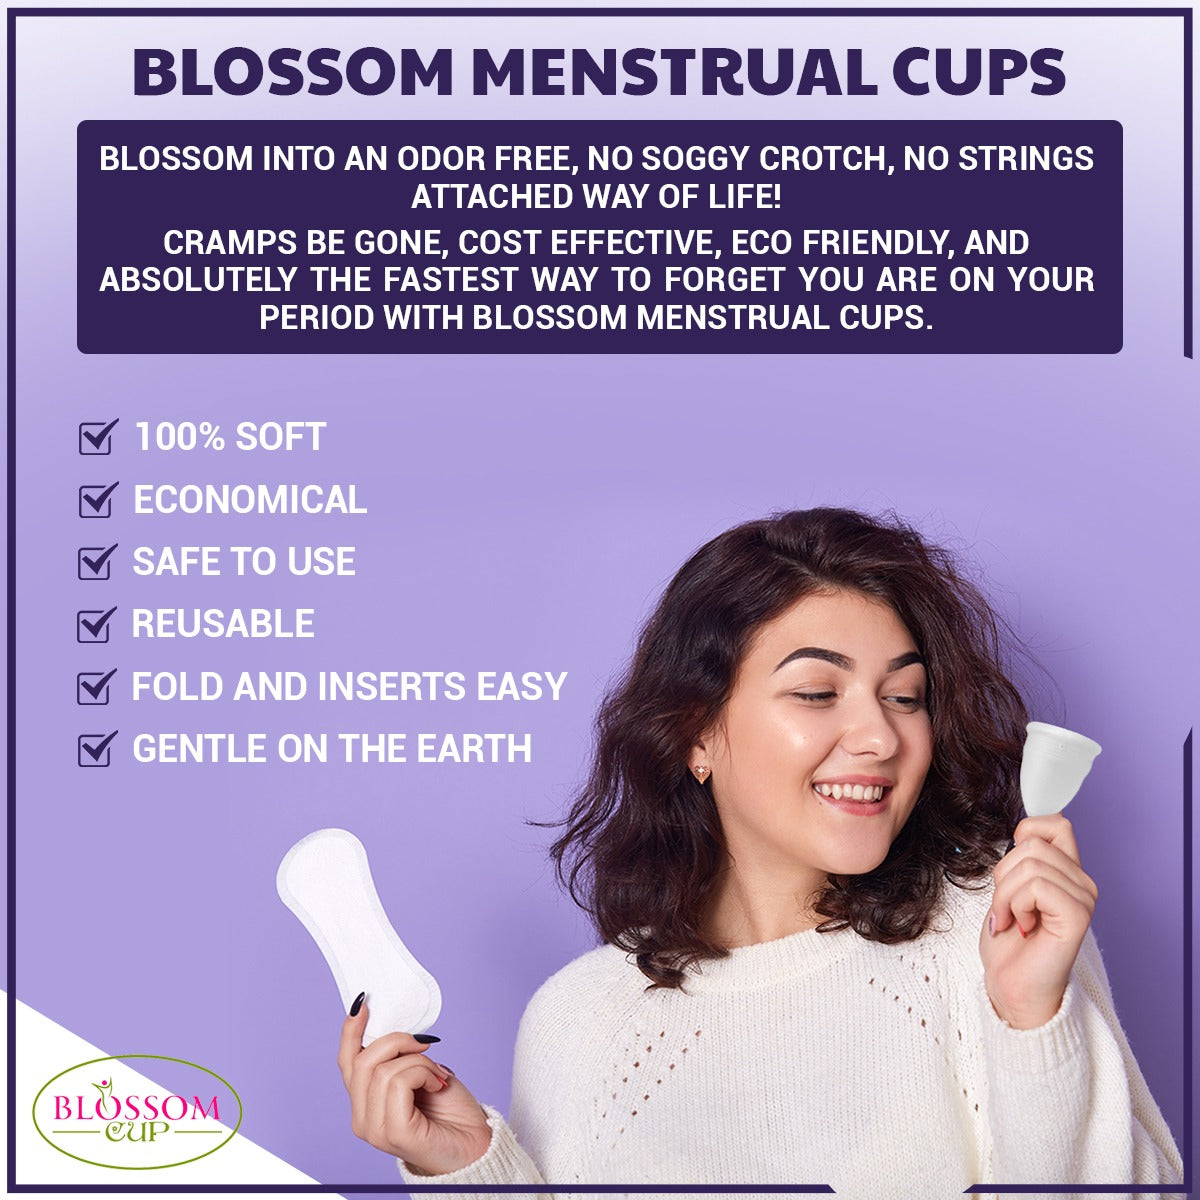 Do Pads and Tampons Contain Chemicals That Can Cause Cancer: Switch now to Blossom Menstrual Cup and Choose the safer, chemical Free, Alternative